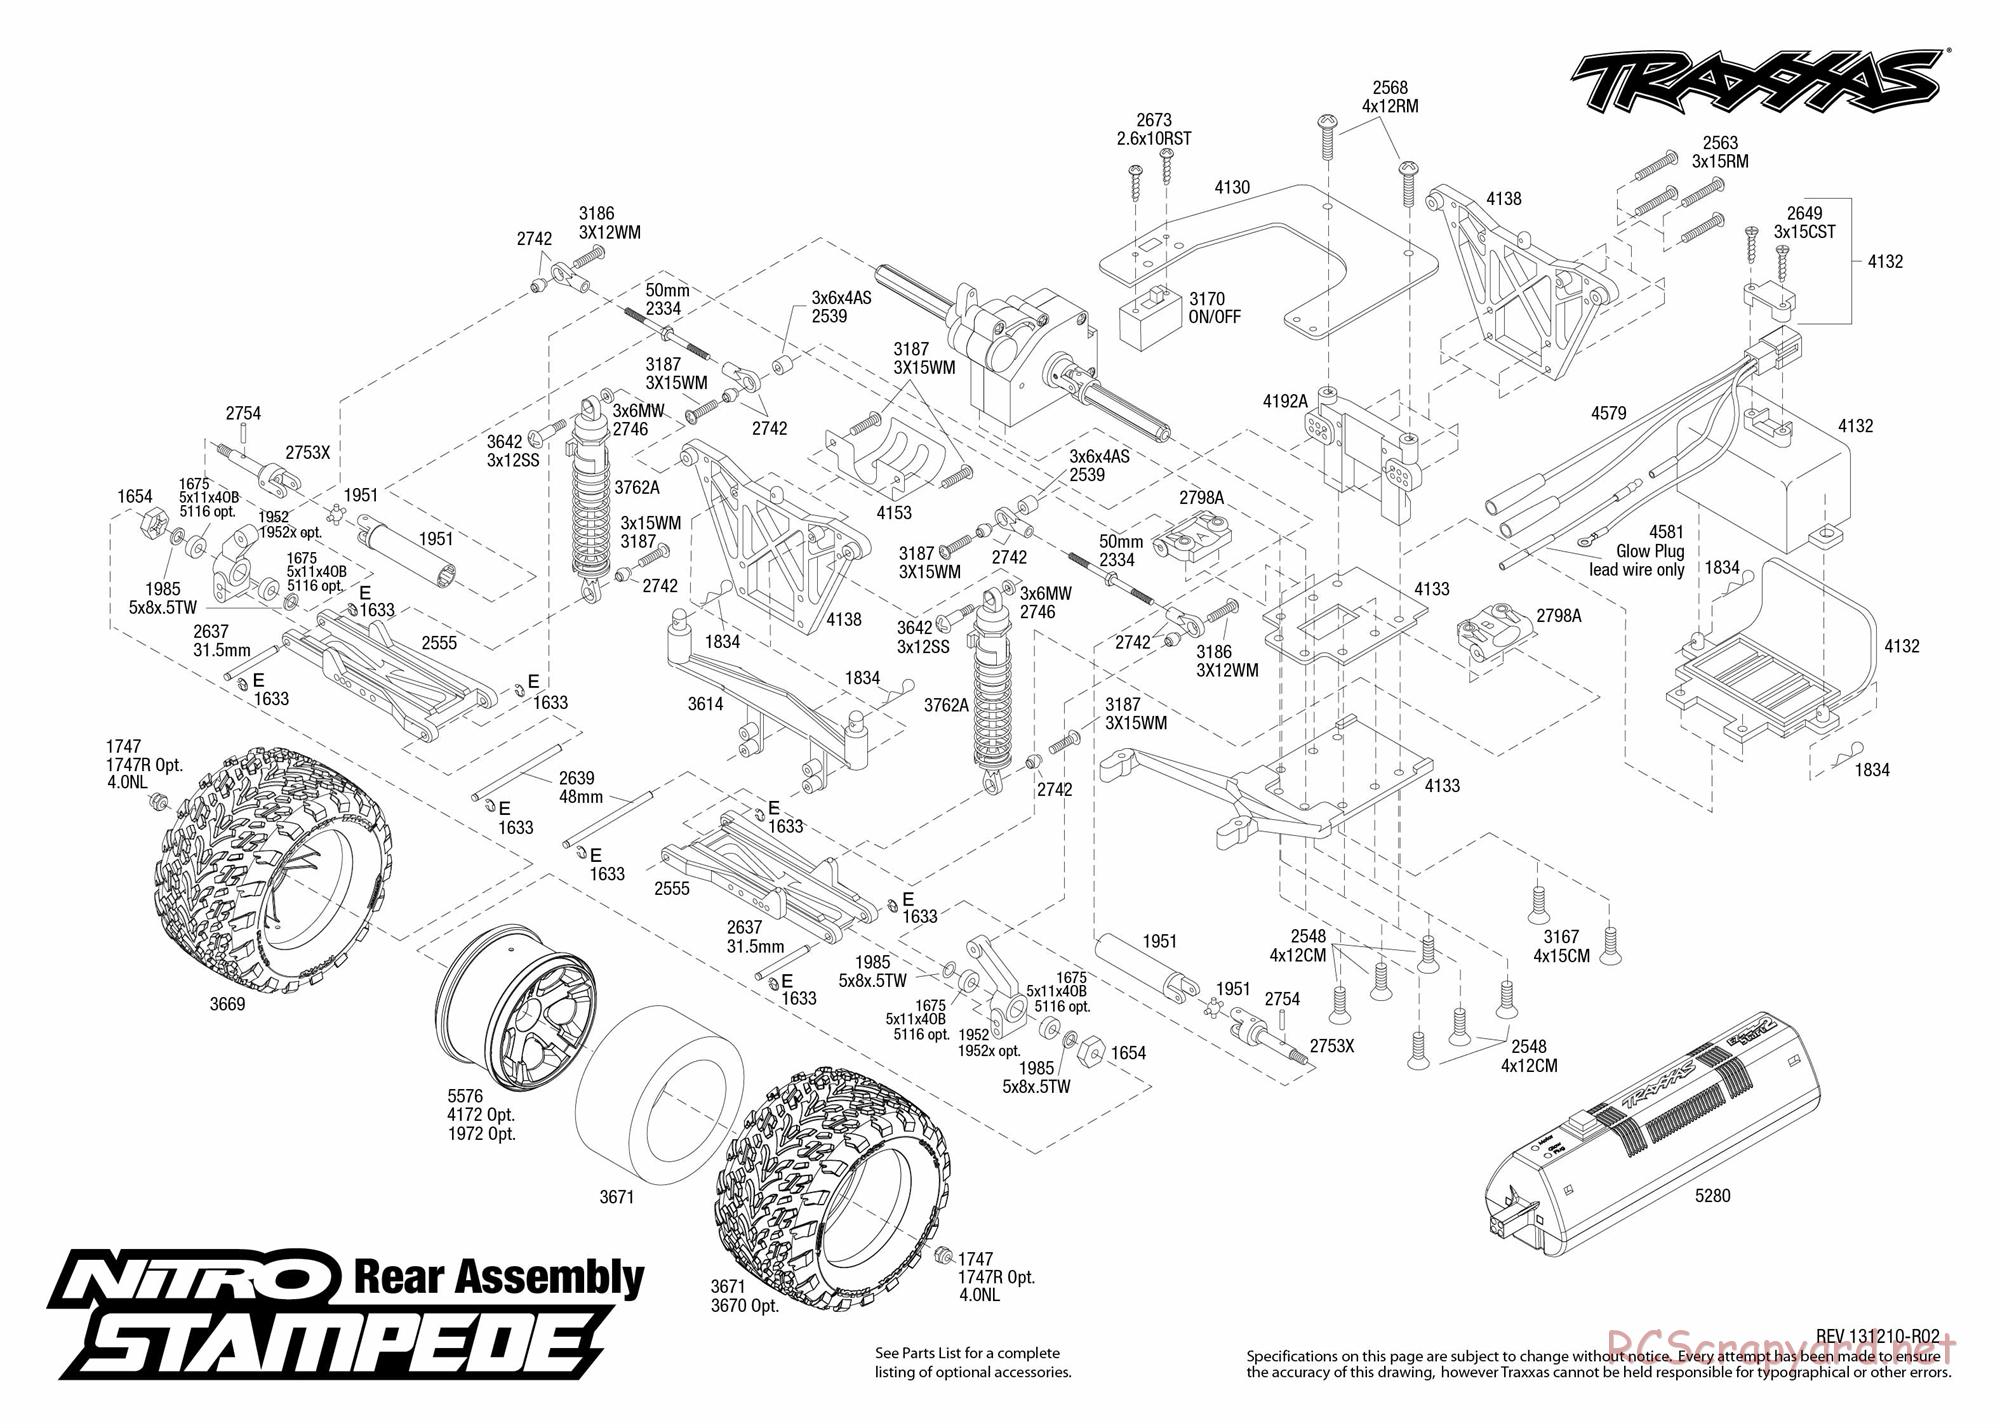 Traxxas - Nitro Stampede (2013) - Exploded Views - Page 3